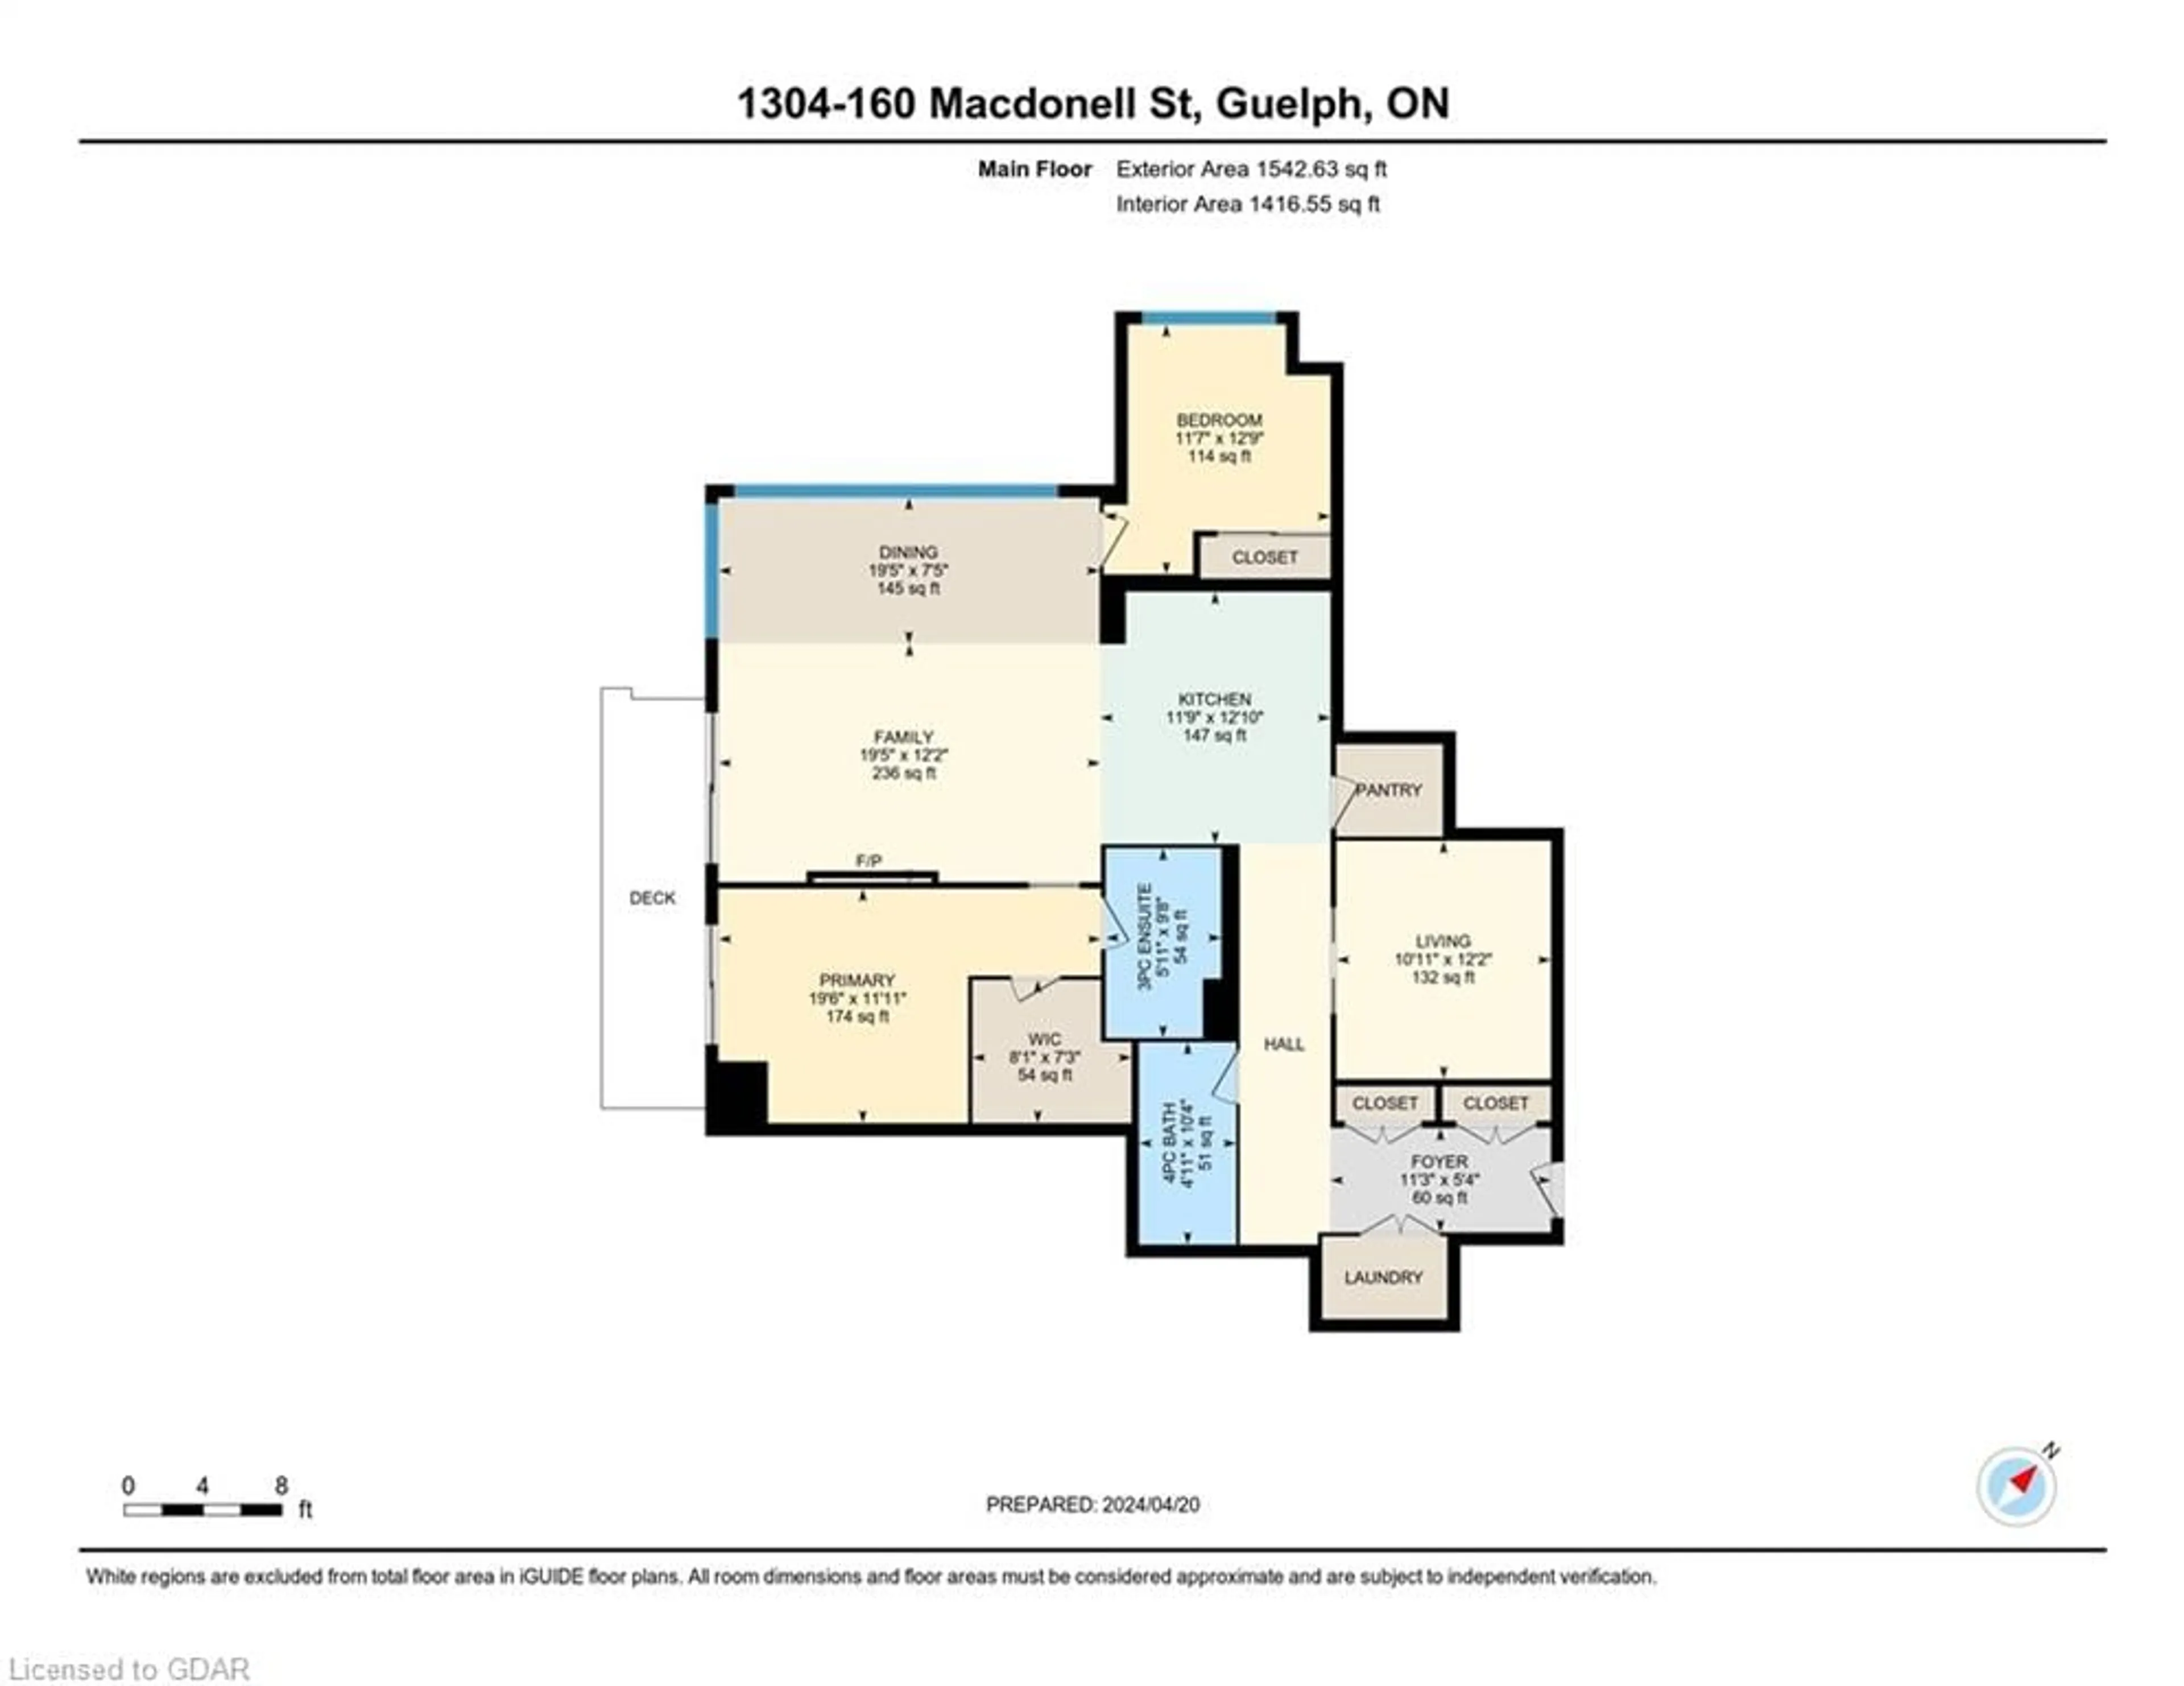 Floor plan for 160 Macdonell St #1304, Guelph Ontario N1H 0A9